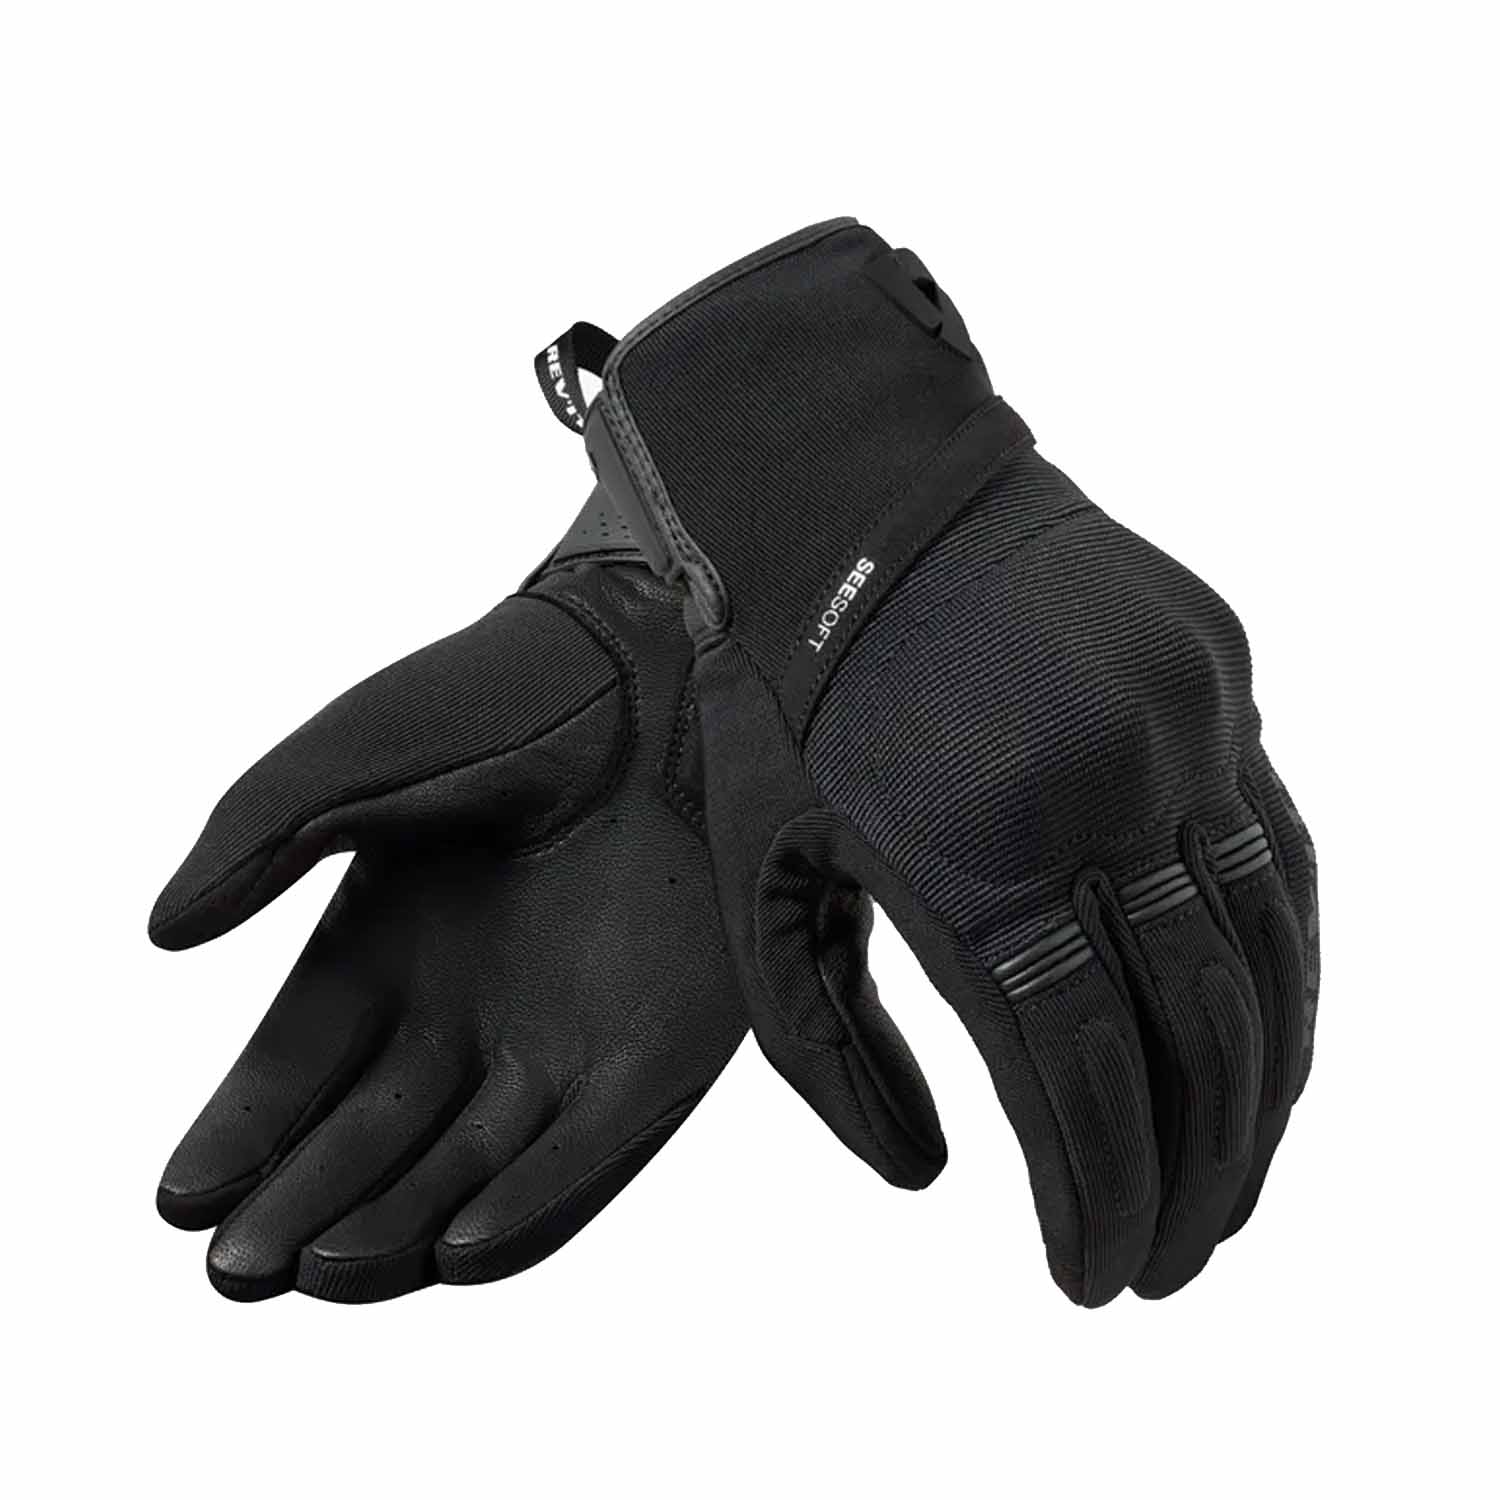 Image of EU REV'IT! Mosca 2 Gloves Black Taille XL